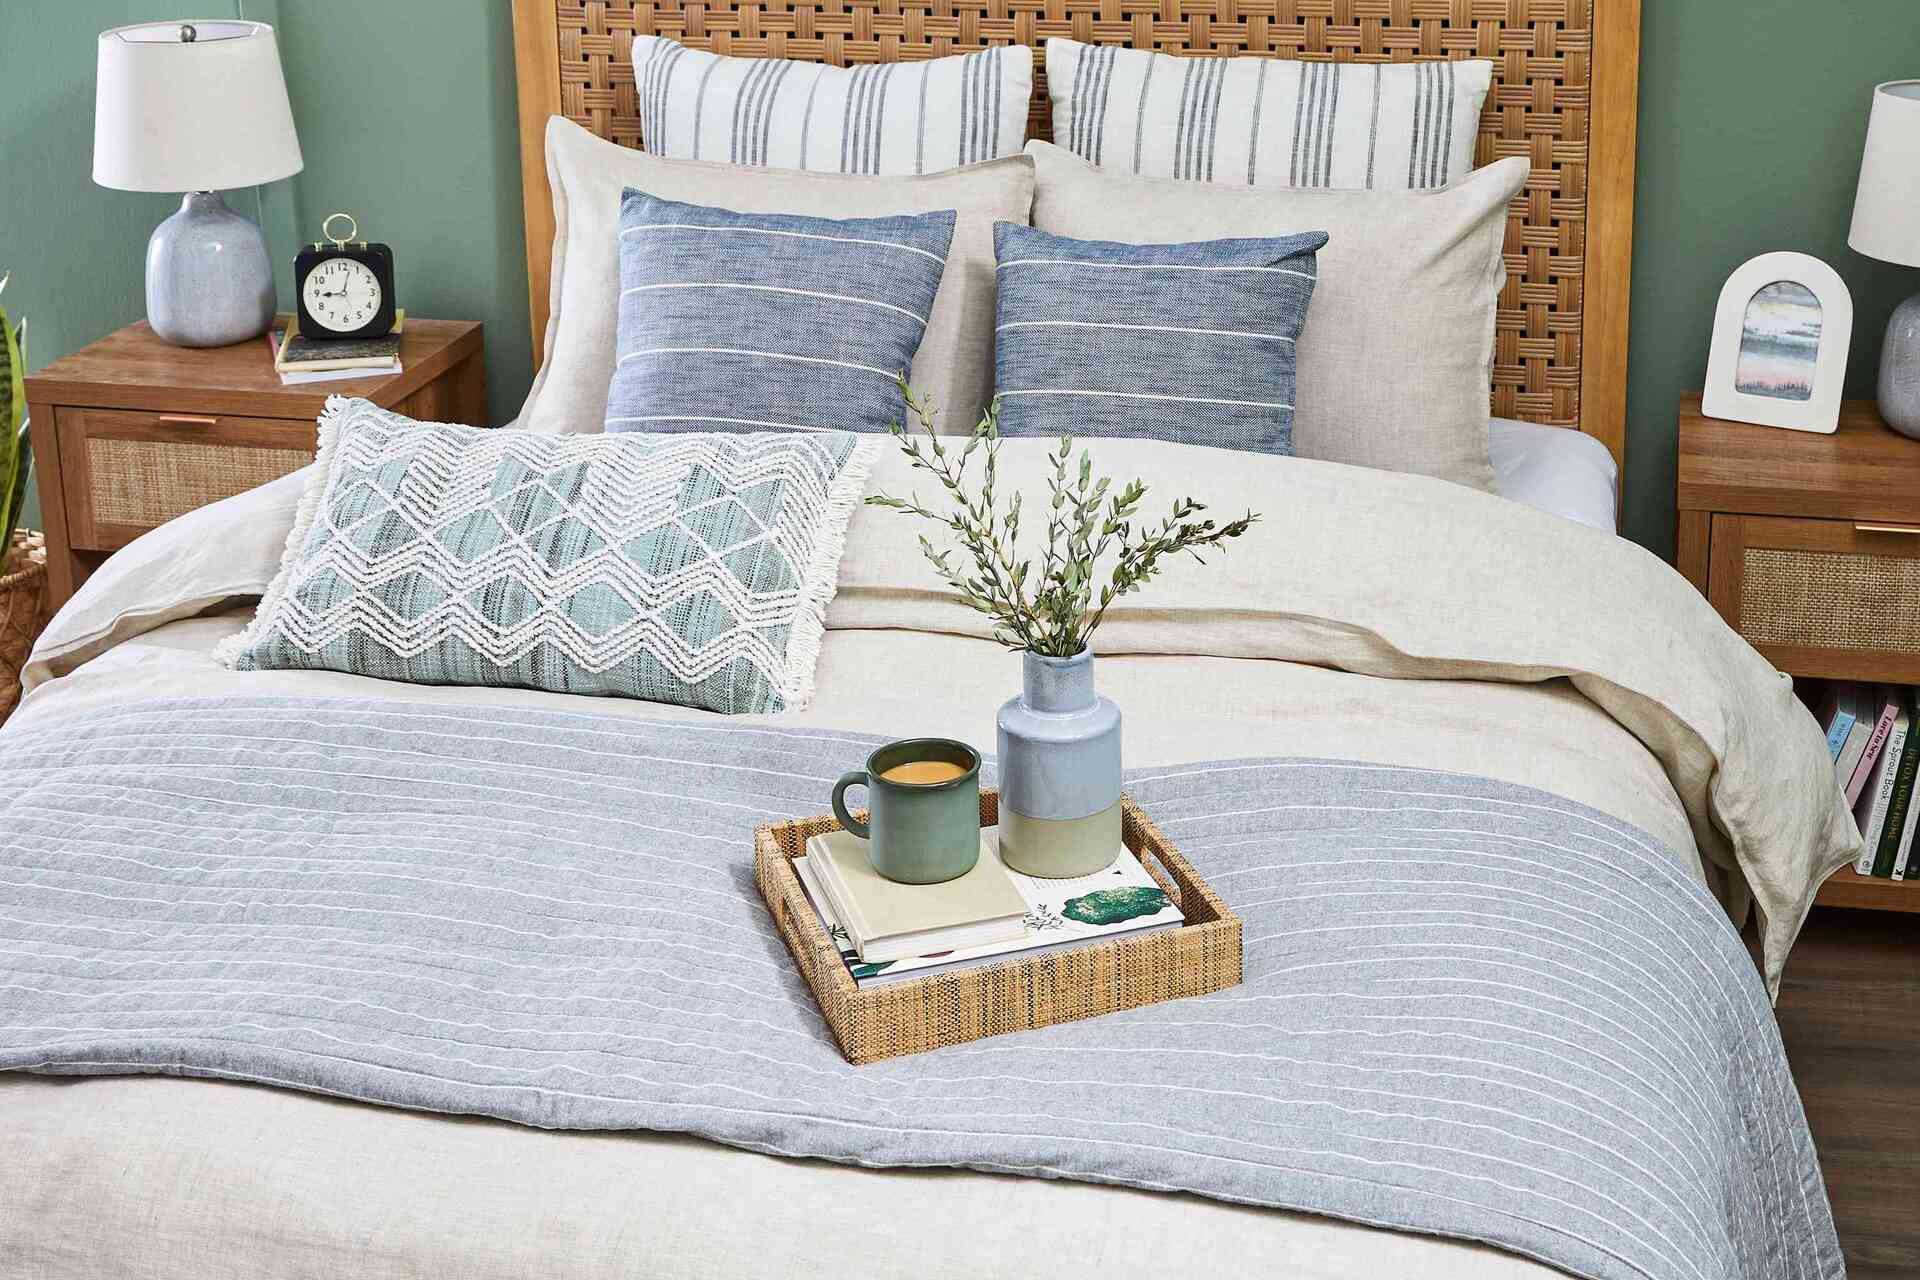 8 Reasons To Make Your Bed Every Day